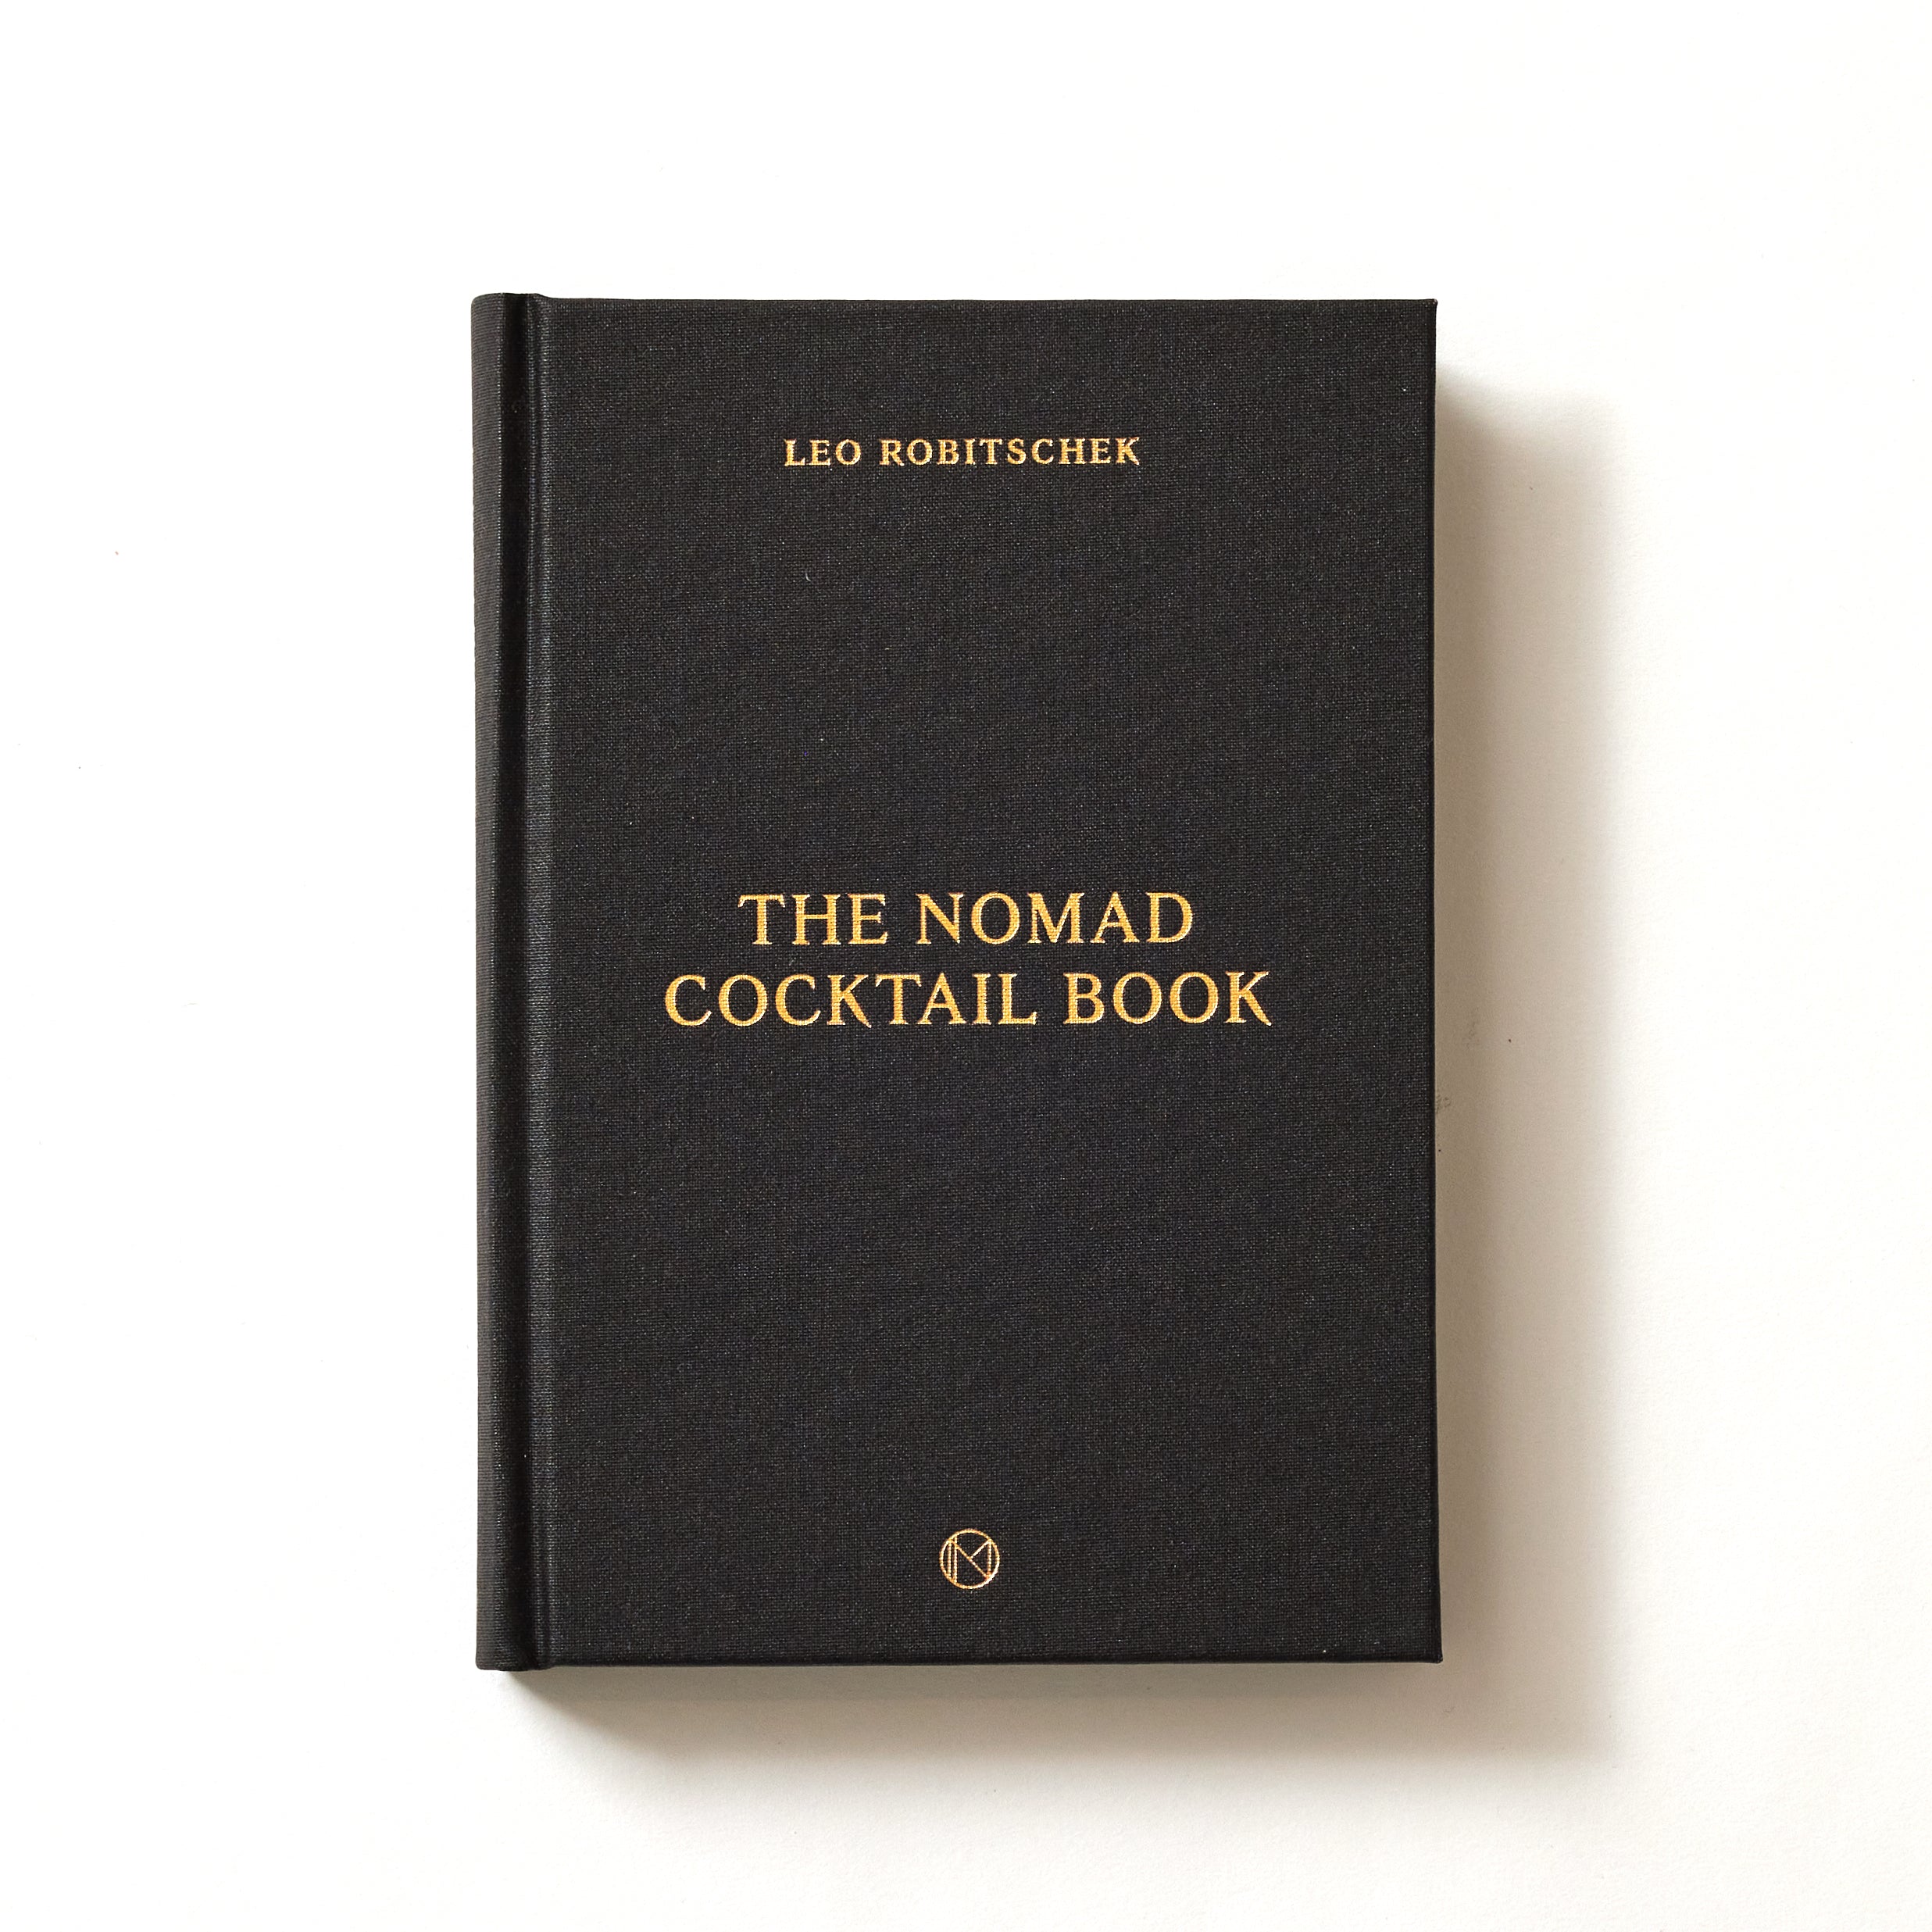 Black hardcover book titled 'The Nomad Cocktail Book' by Leo Robitschek